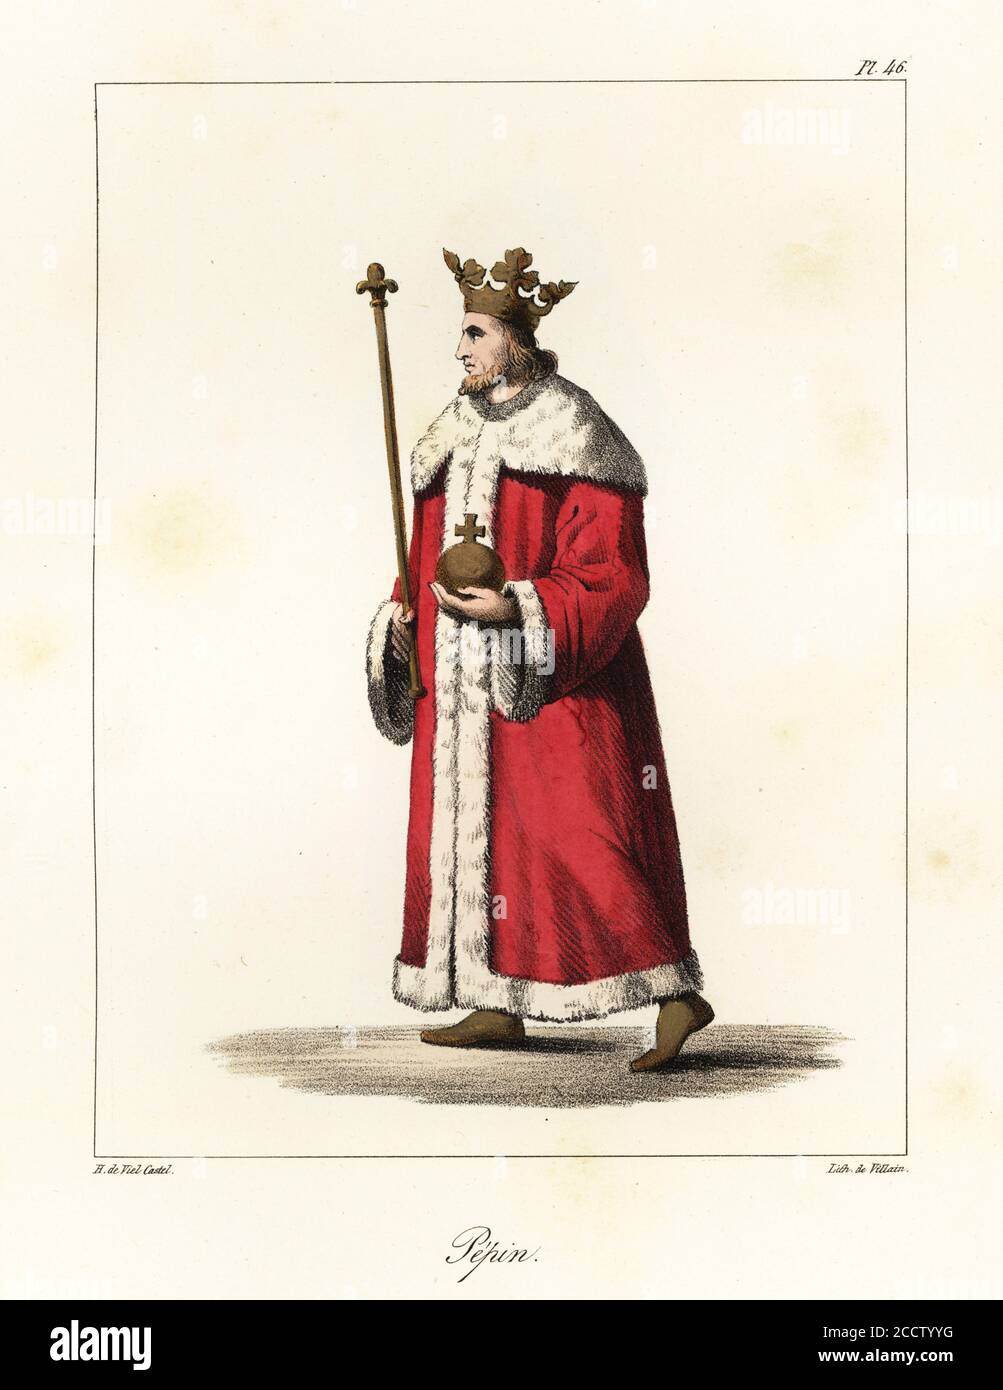 King Pepin the Short, King of the Franks, Carolingian Dynasty, 714-768. In crown with orb and sceptre, wearing a crimson cloak edged in ermine. Pepin le Bref. Handcoloured lithograph by Villain after an illustration by Horace de Viel-Castel from his Collection des costumes, armes et meubles pour servir à l'histoire de la France (Collection of costumes, weapons and furniture to be used in the history of France), Treuttel & Wurtz, Bossange, 1827. Stock Photo